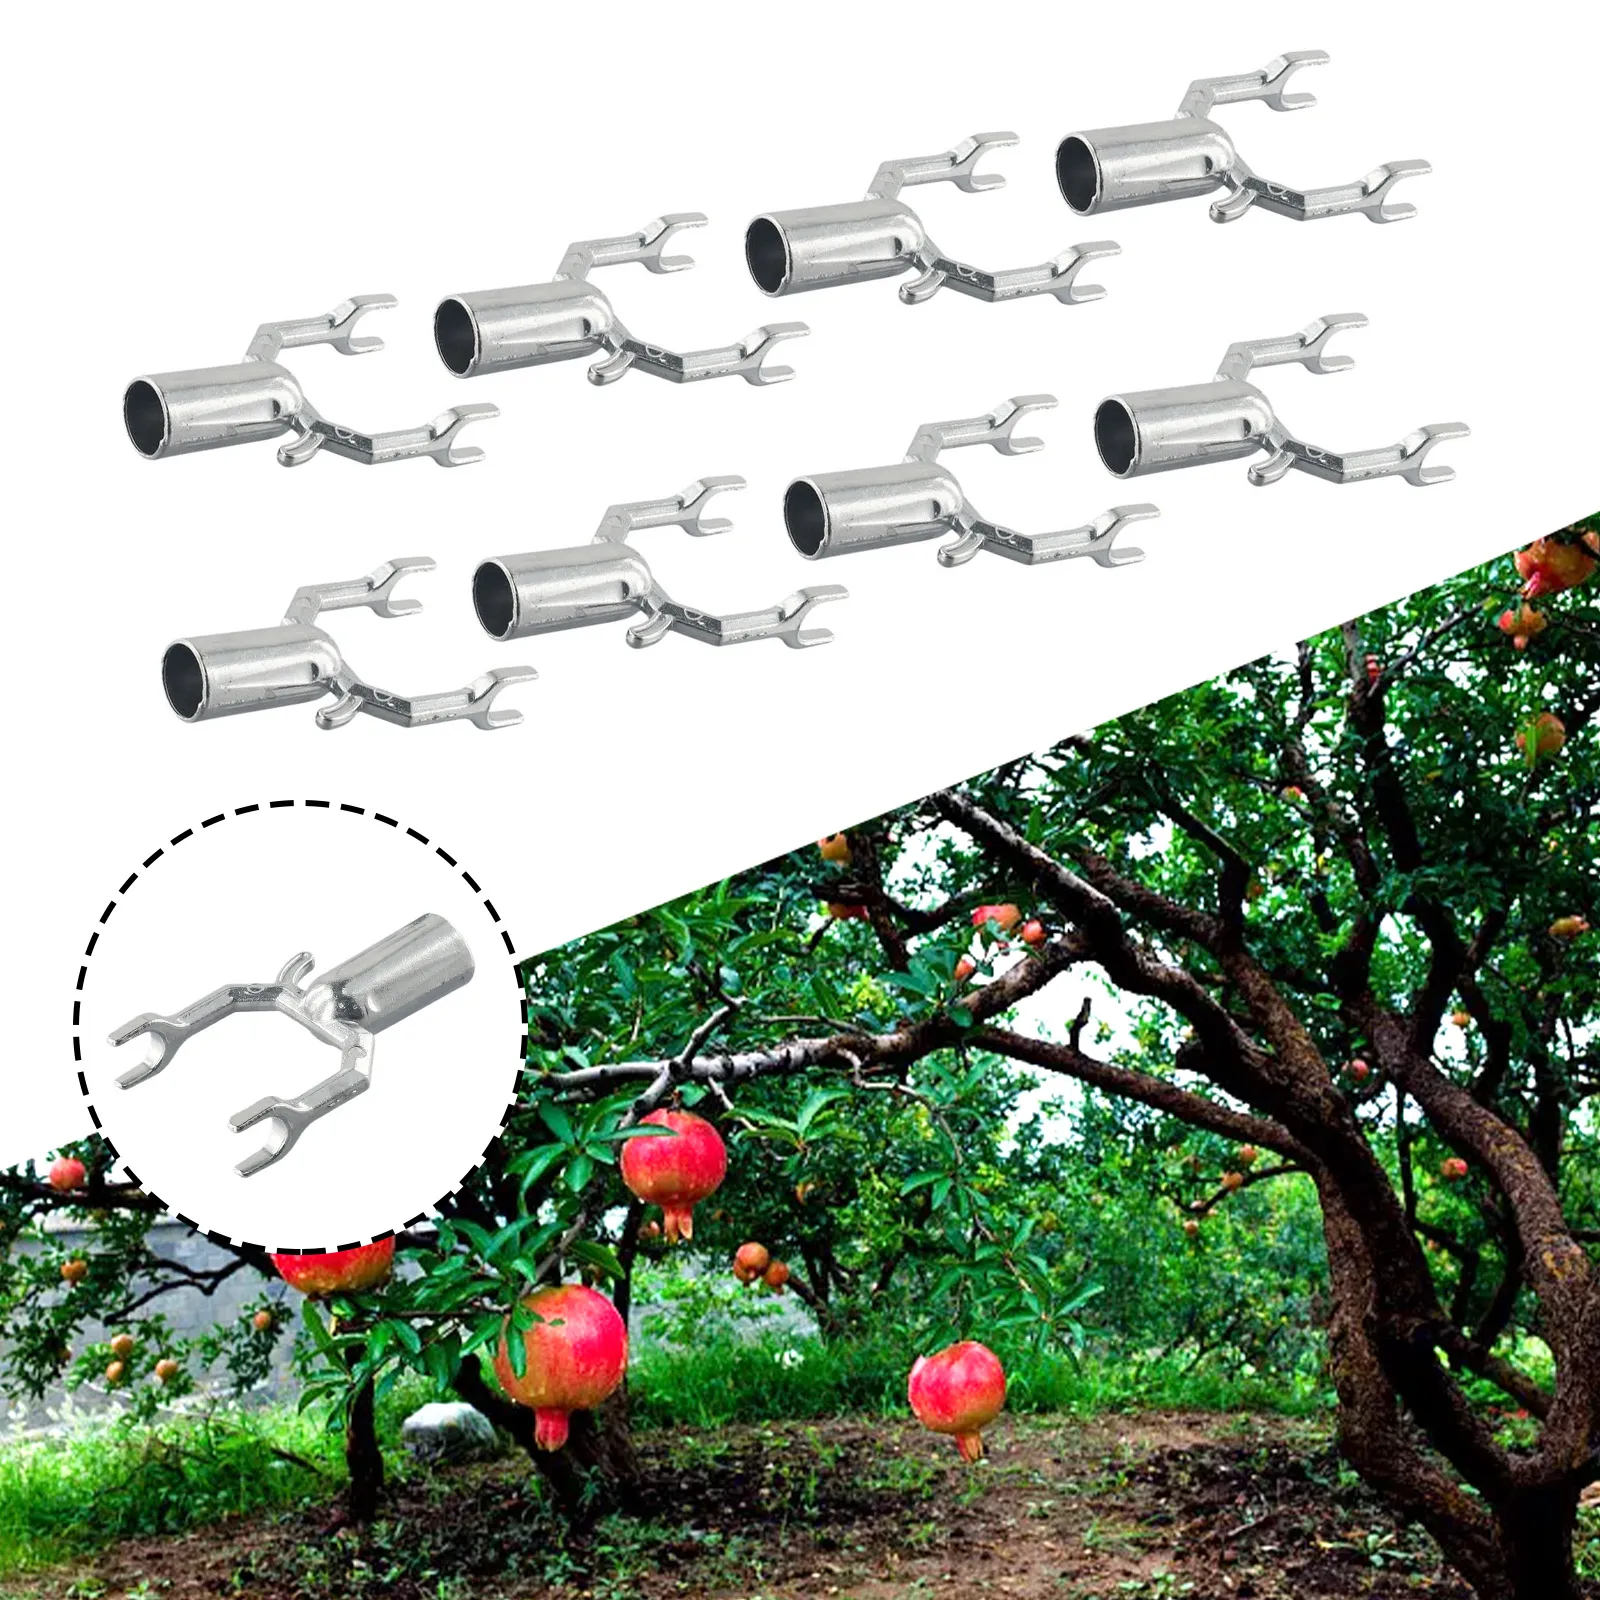 

Hot Sale Branch Support Branches Bracket Long Service Life Widely In Fruited Branches Fruit Tree Branch Crutch